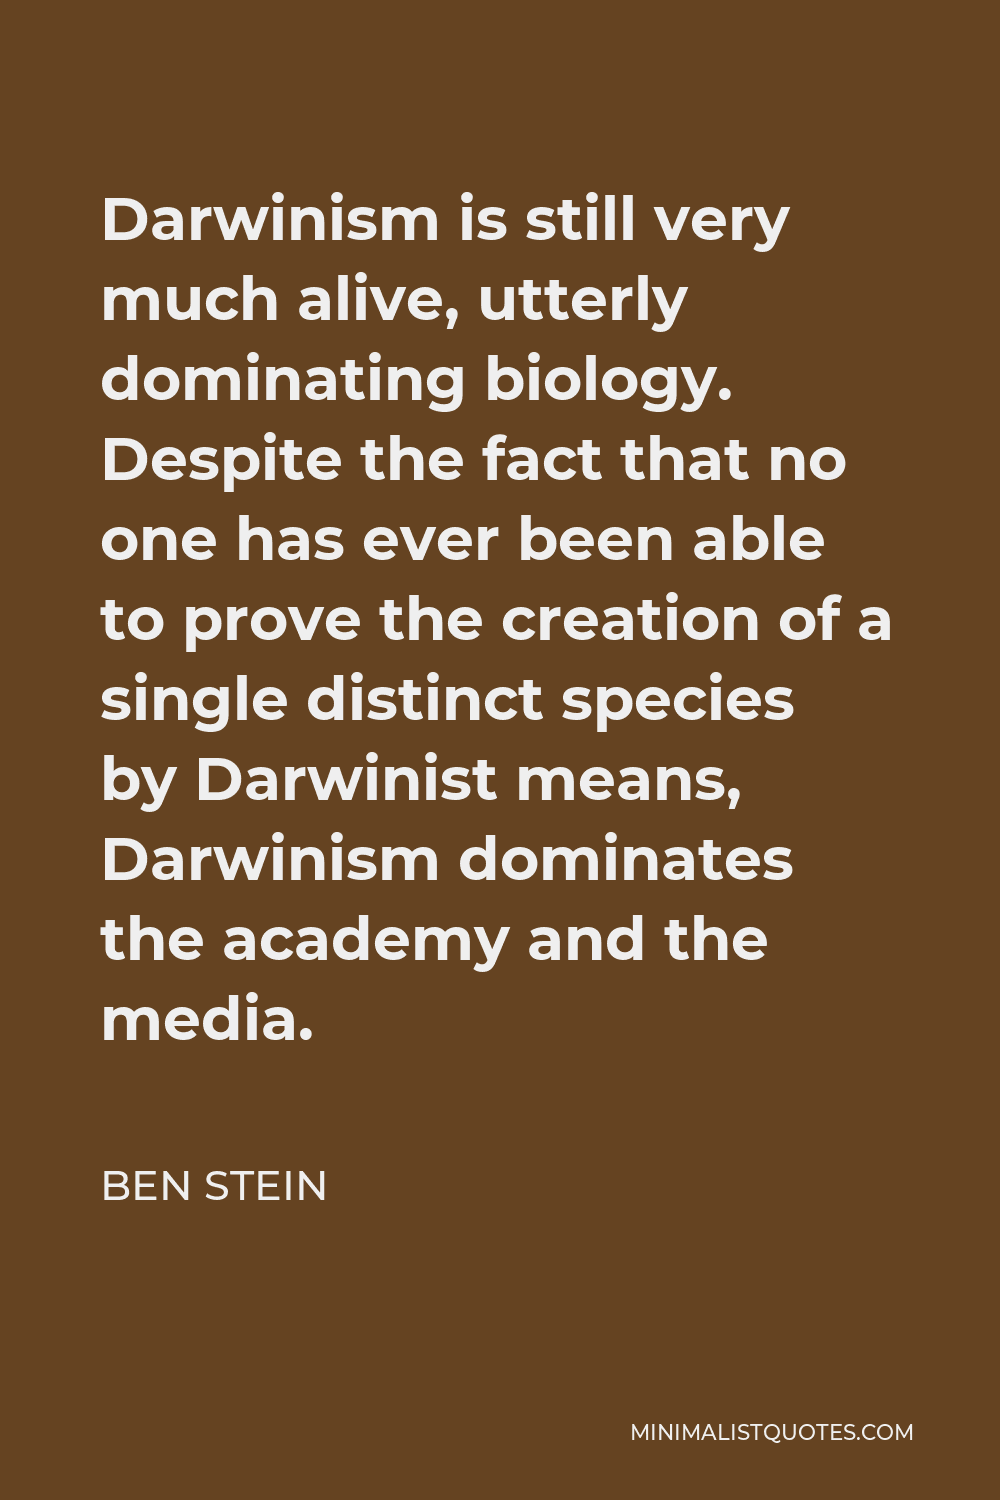 Ben Stein Quote - Darwinism is still very much alive, utterly dominating biology. Despite the fact that no one has ever been able to prove the creation of a single distinct species by Darwinist means, Darwinism dominates the academy and the media.